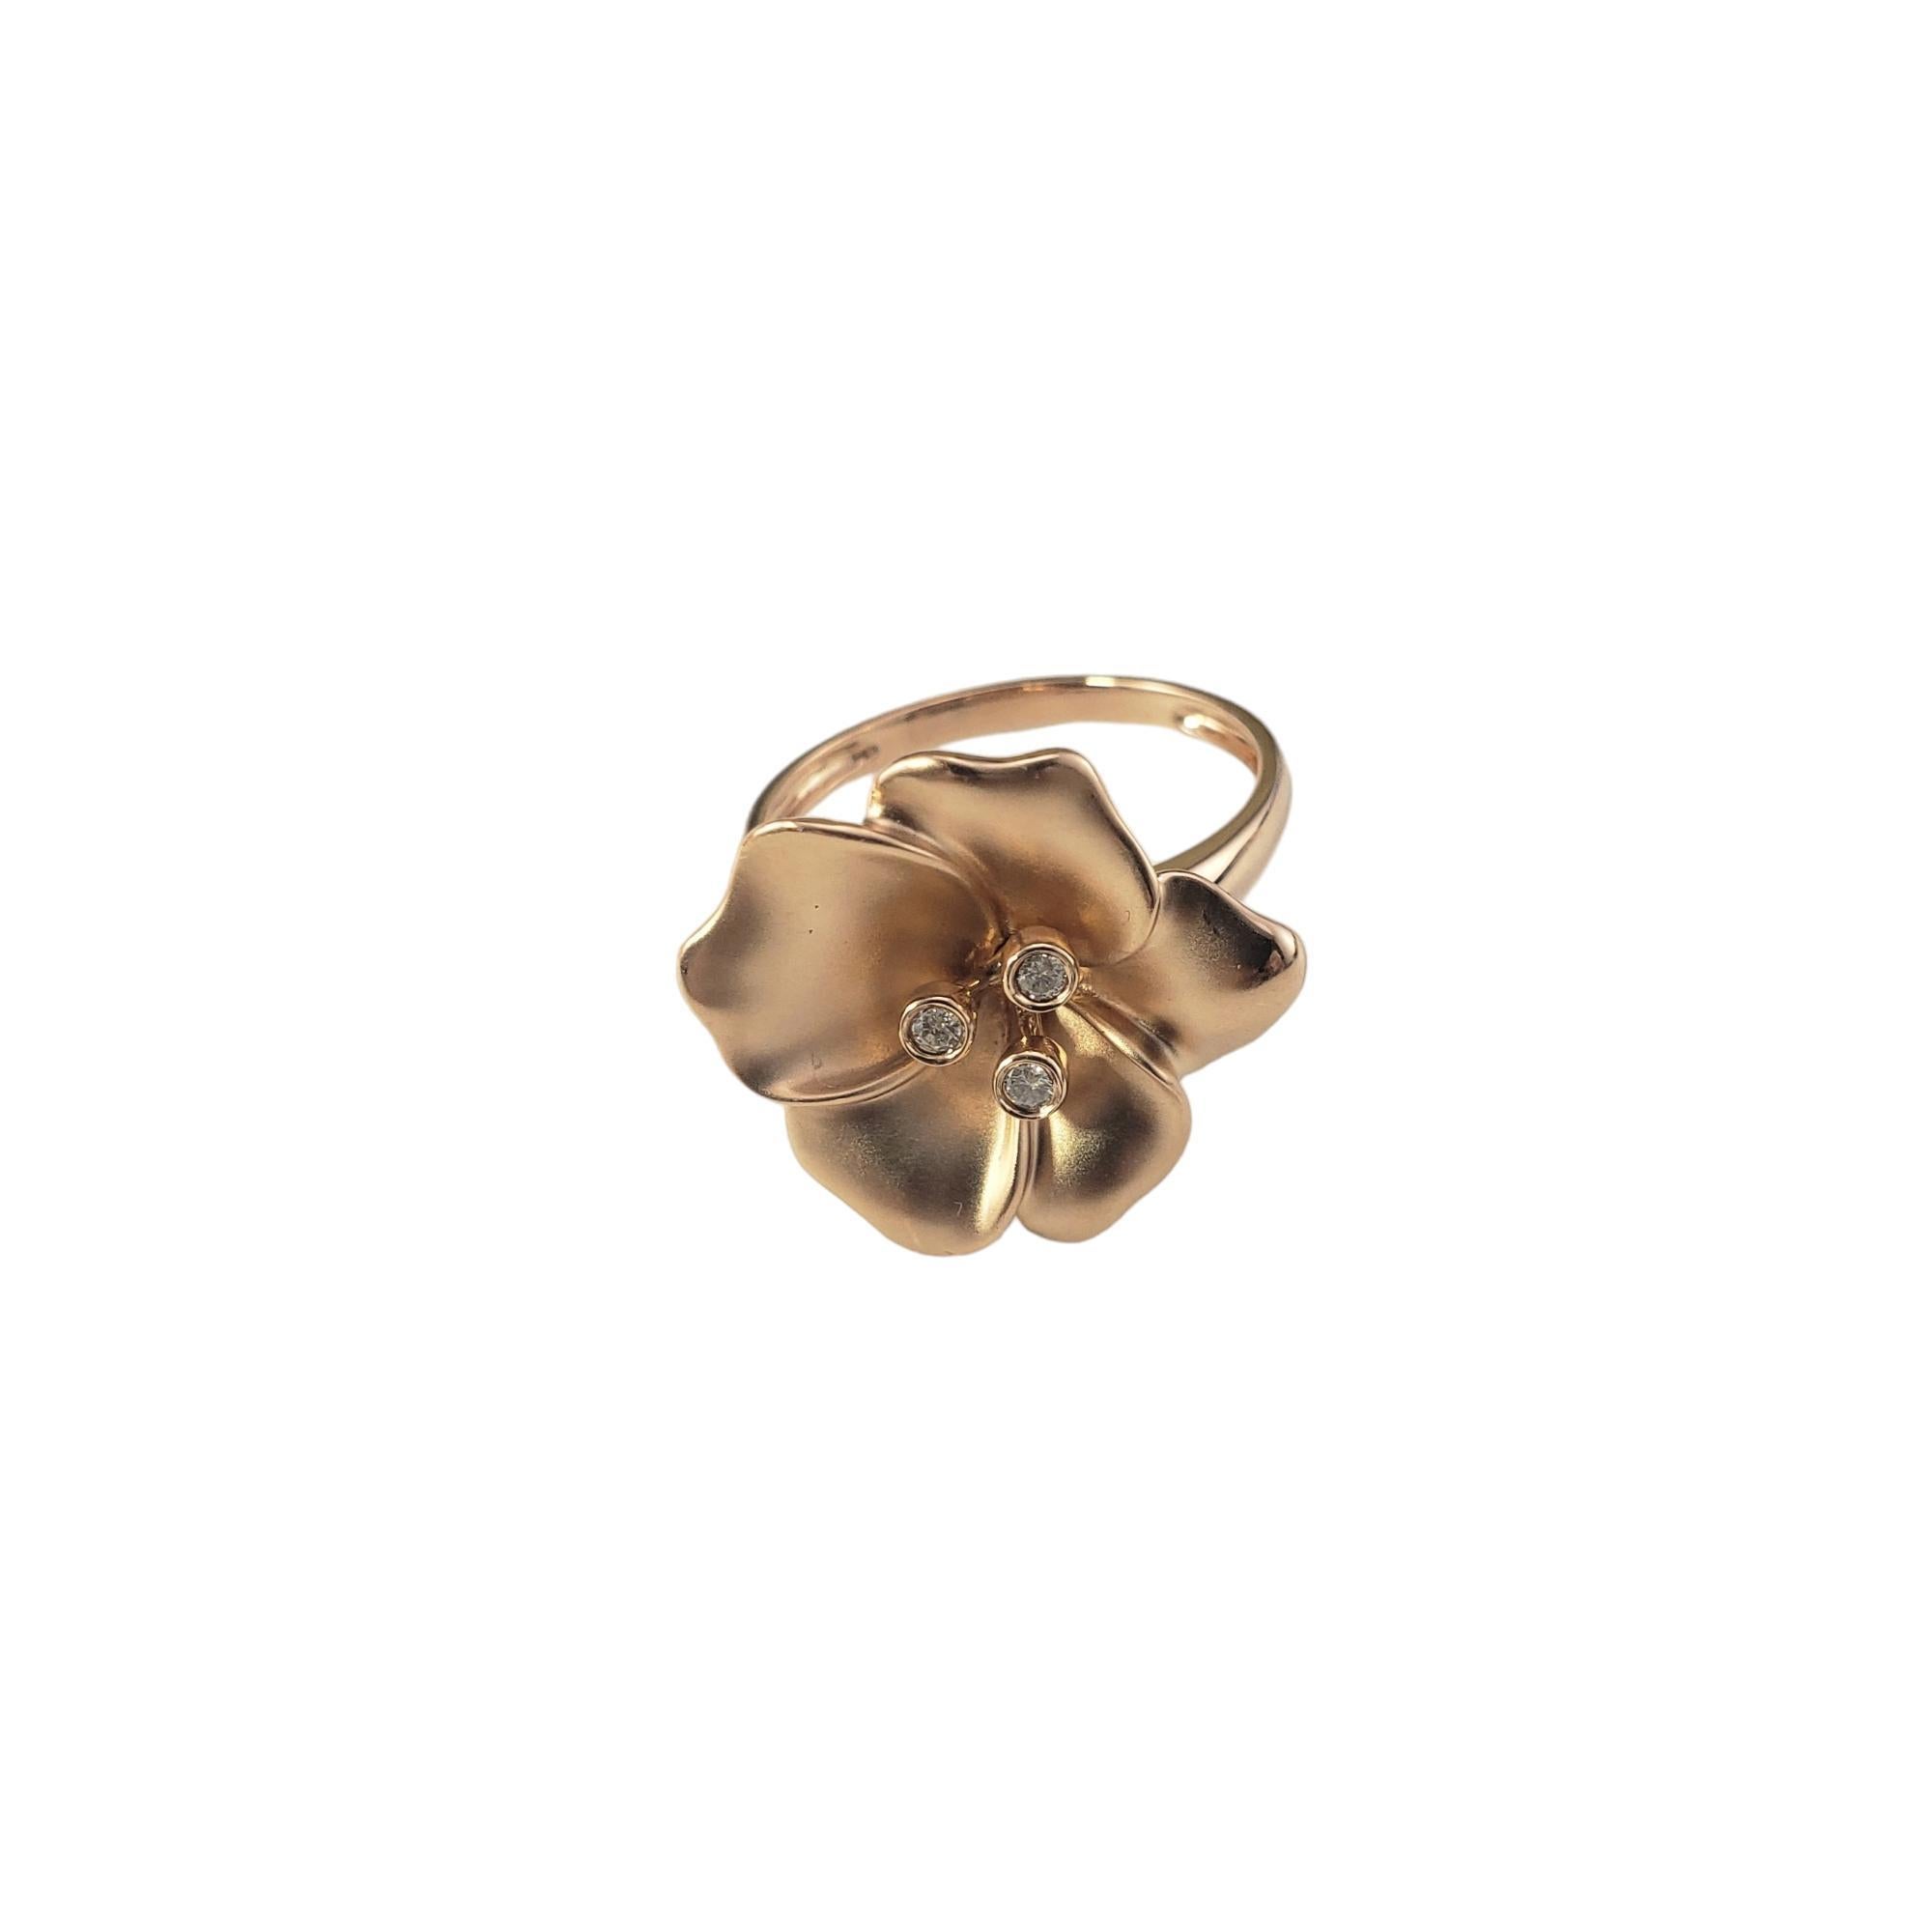 14 Karat Yellow Gold and Diamond Flower Ring Size 8.25

This stunning flower ring features three round brilliant cut diamonds set in beautifully detailed 14K yellow gold.

Width: 20 mm.  Shank: 2 mm.

Approximate total diamond weight:  .06